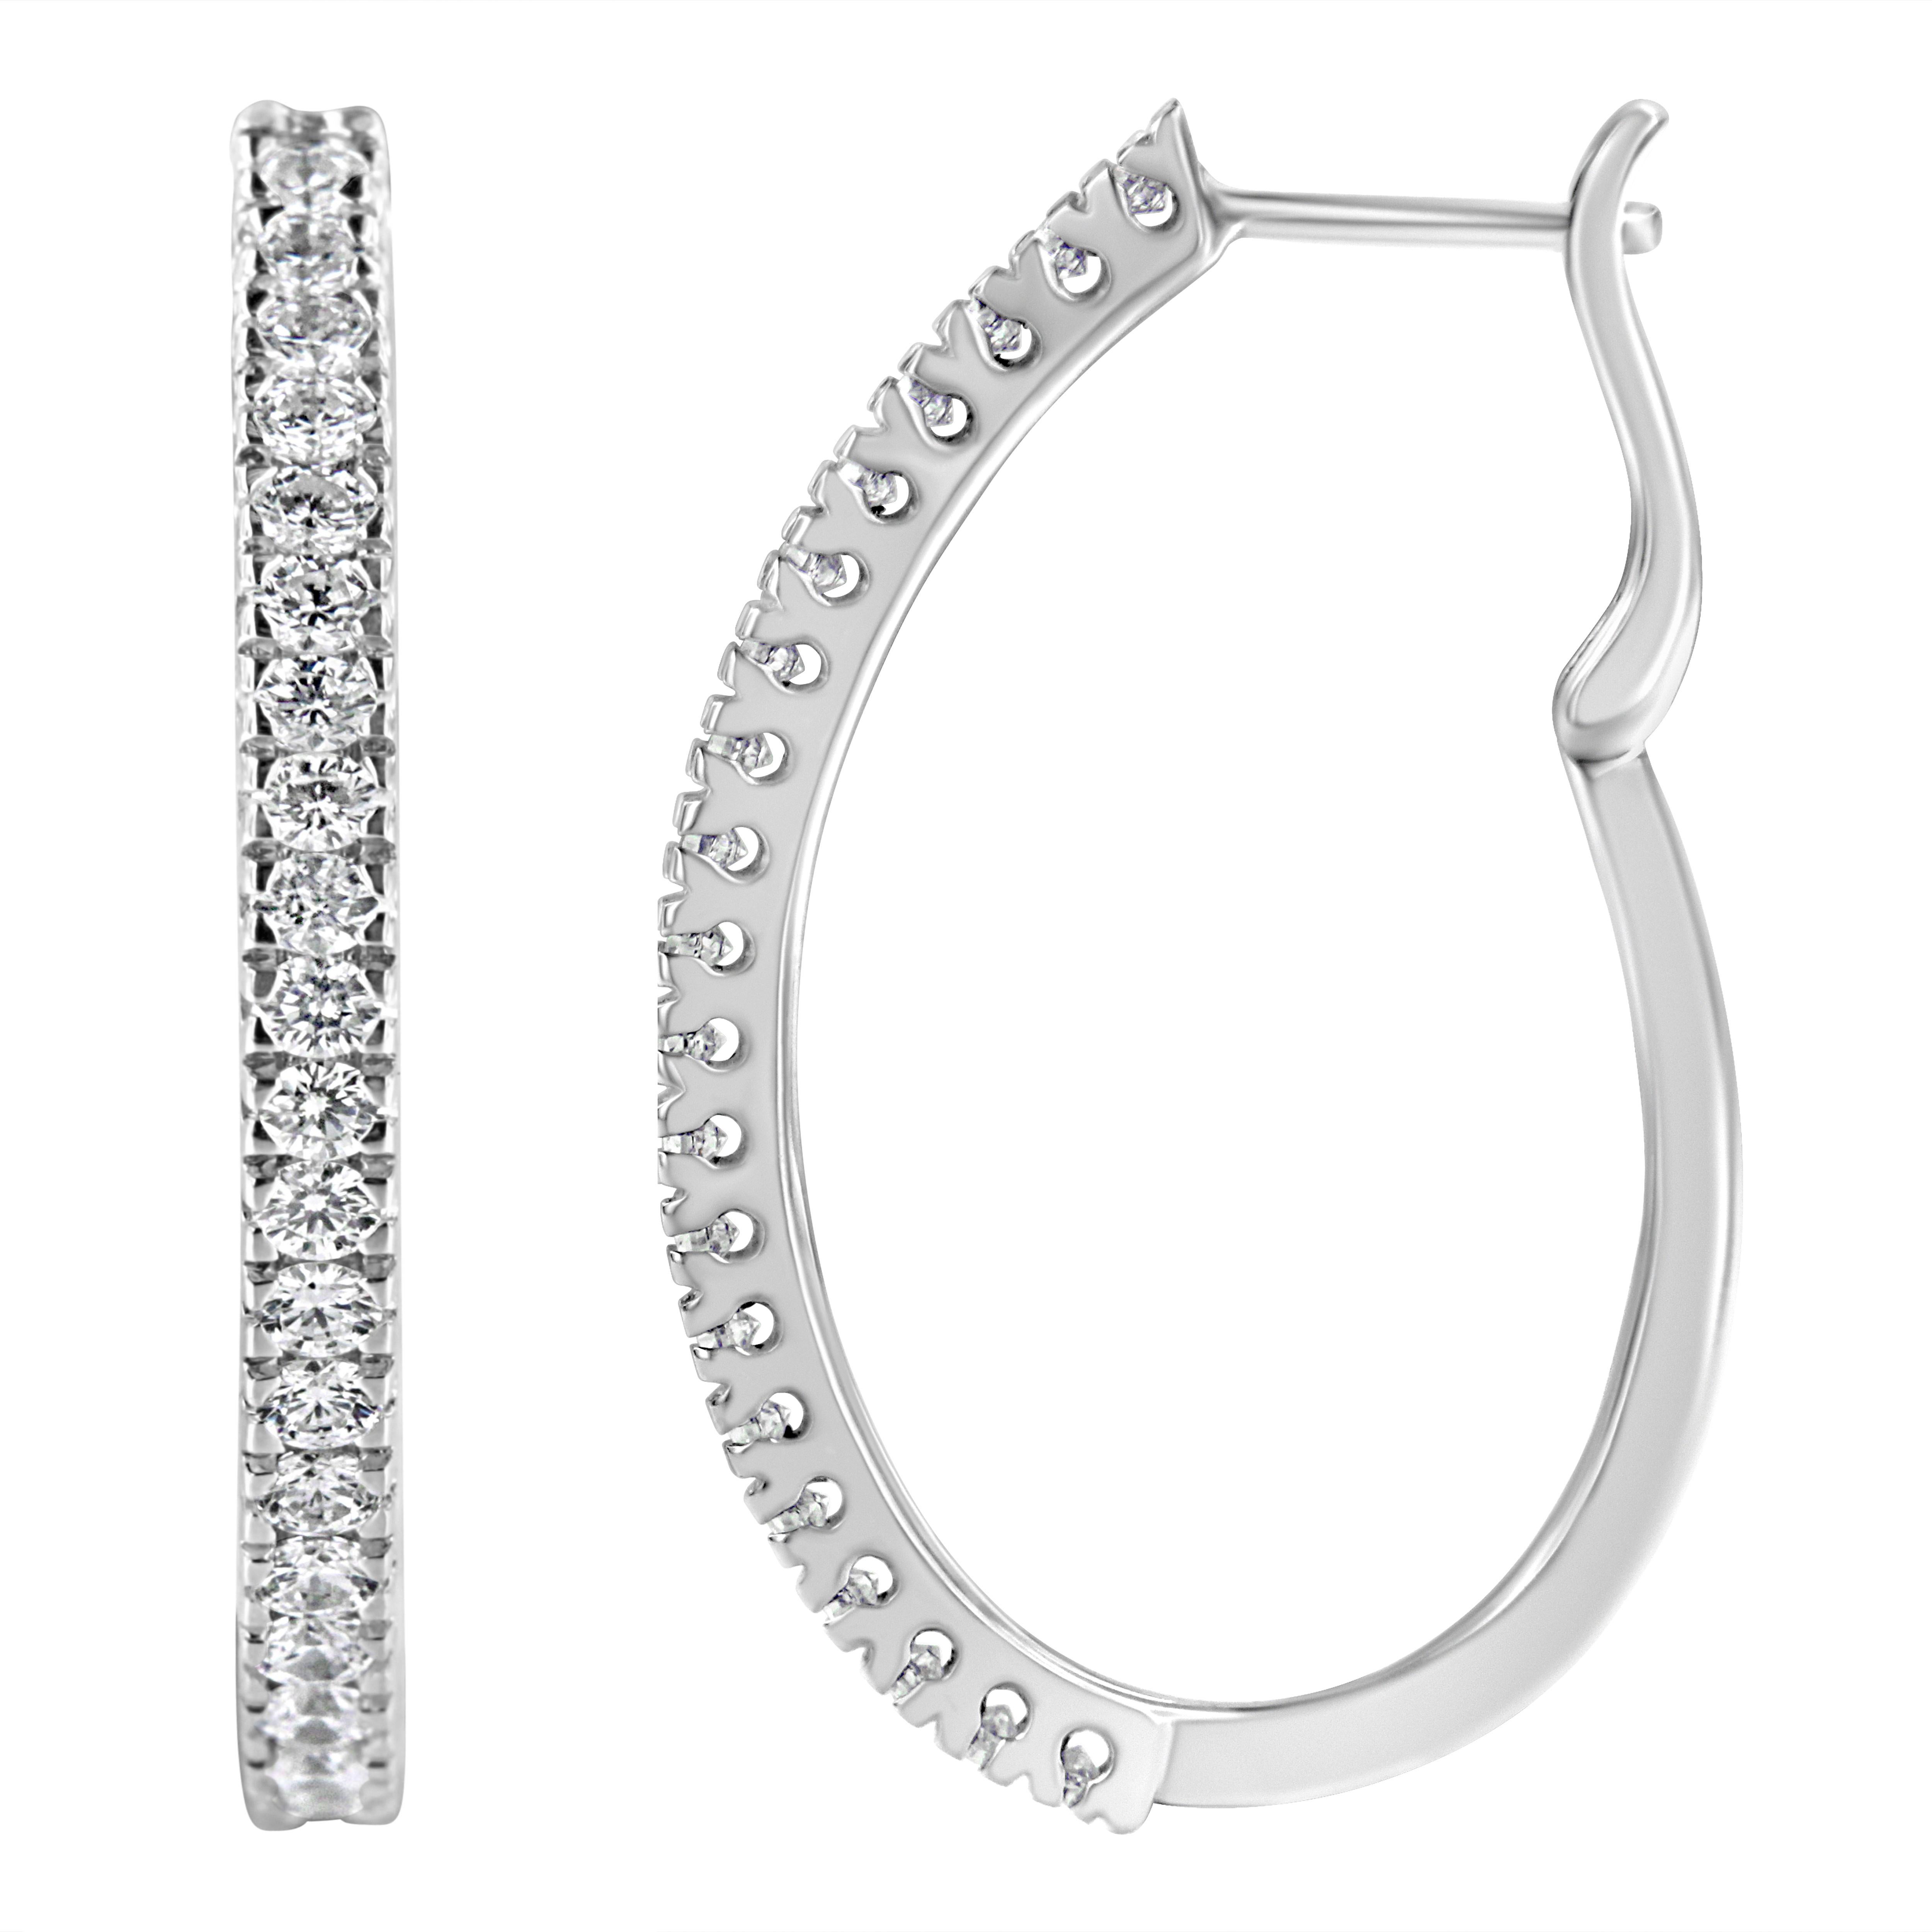 This classic 10k white gold hoop earring feature 1ct TDW of glittering round cut diamonds. The round diamonds are pave set along the front of the hoops for a fine, clean luxury look. A lever back closure keeps the earrings secure.

'Video Available